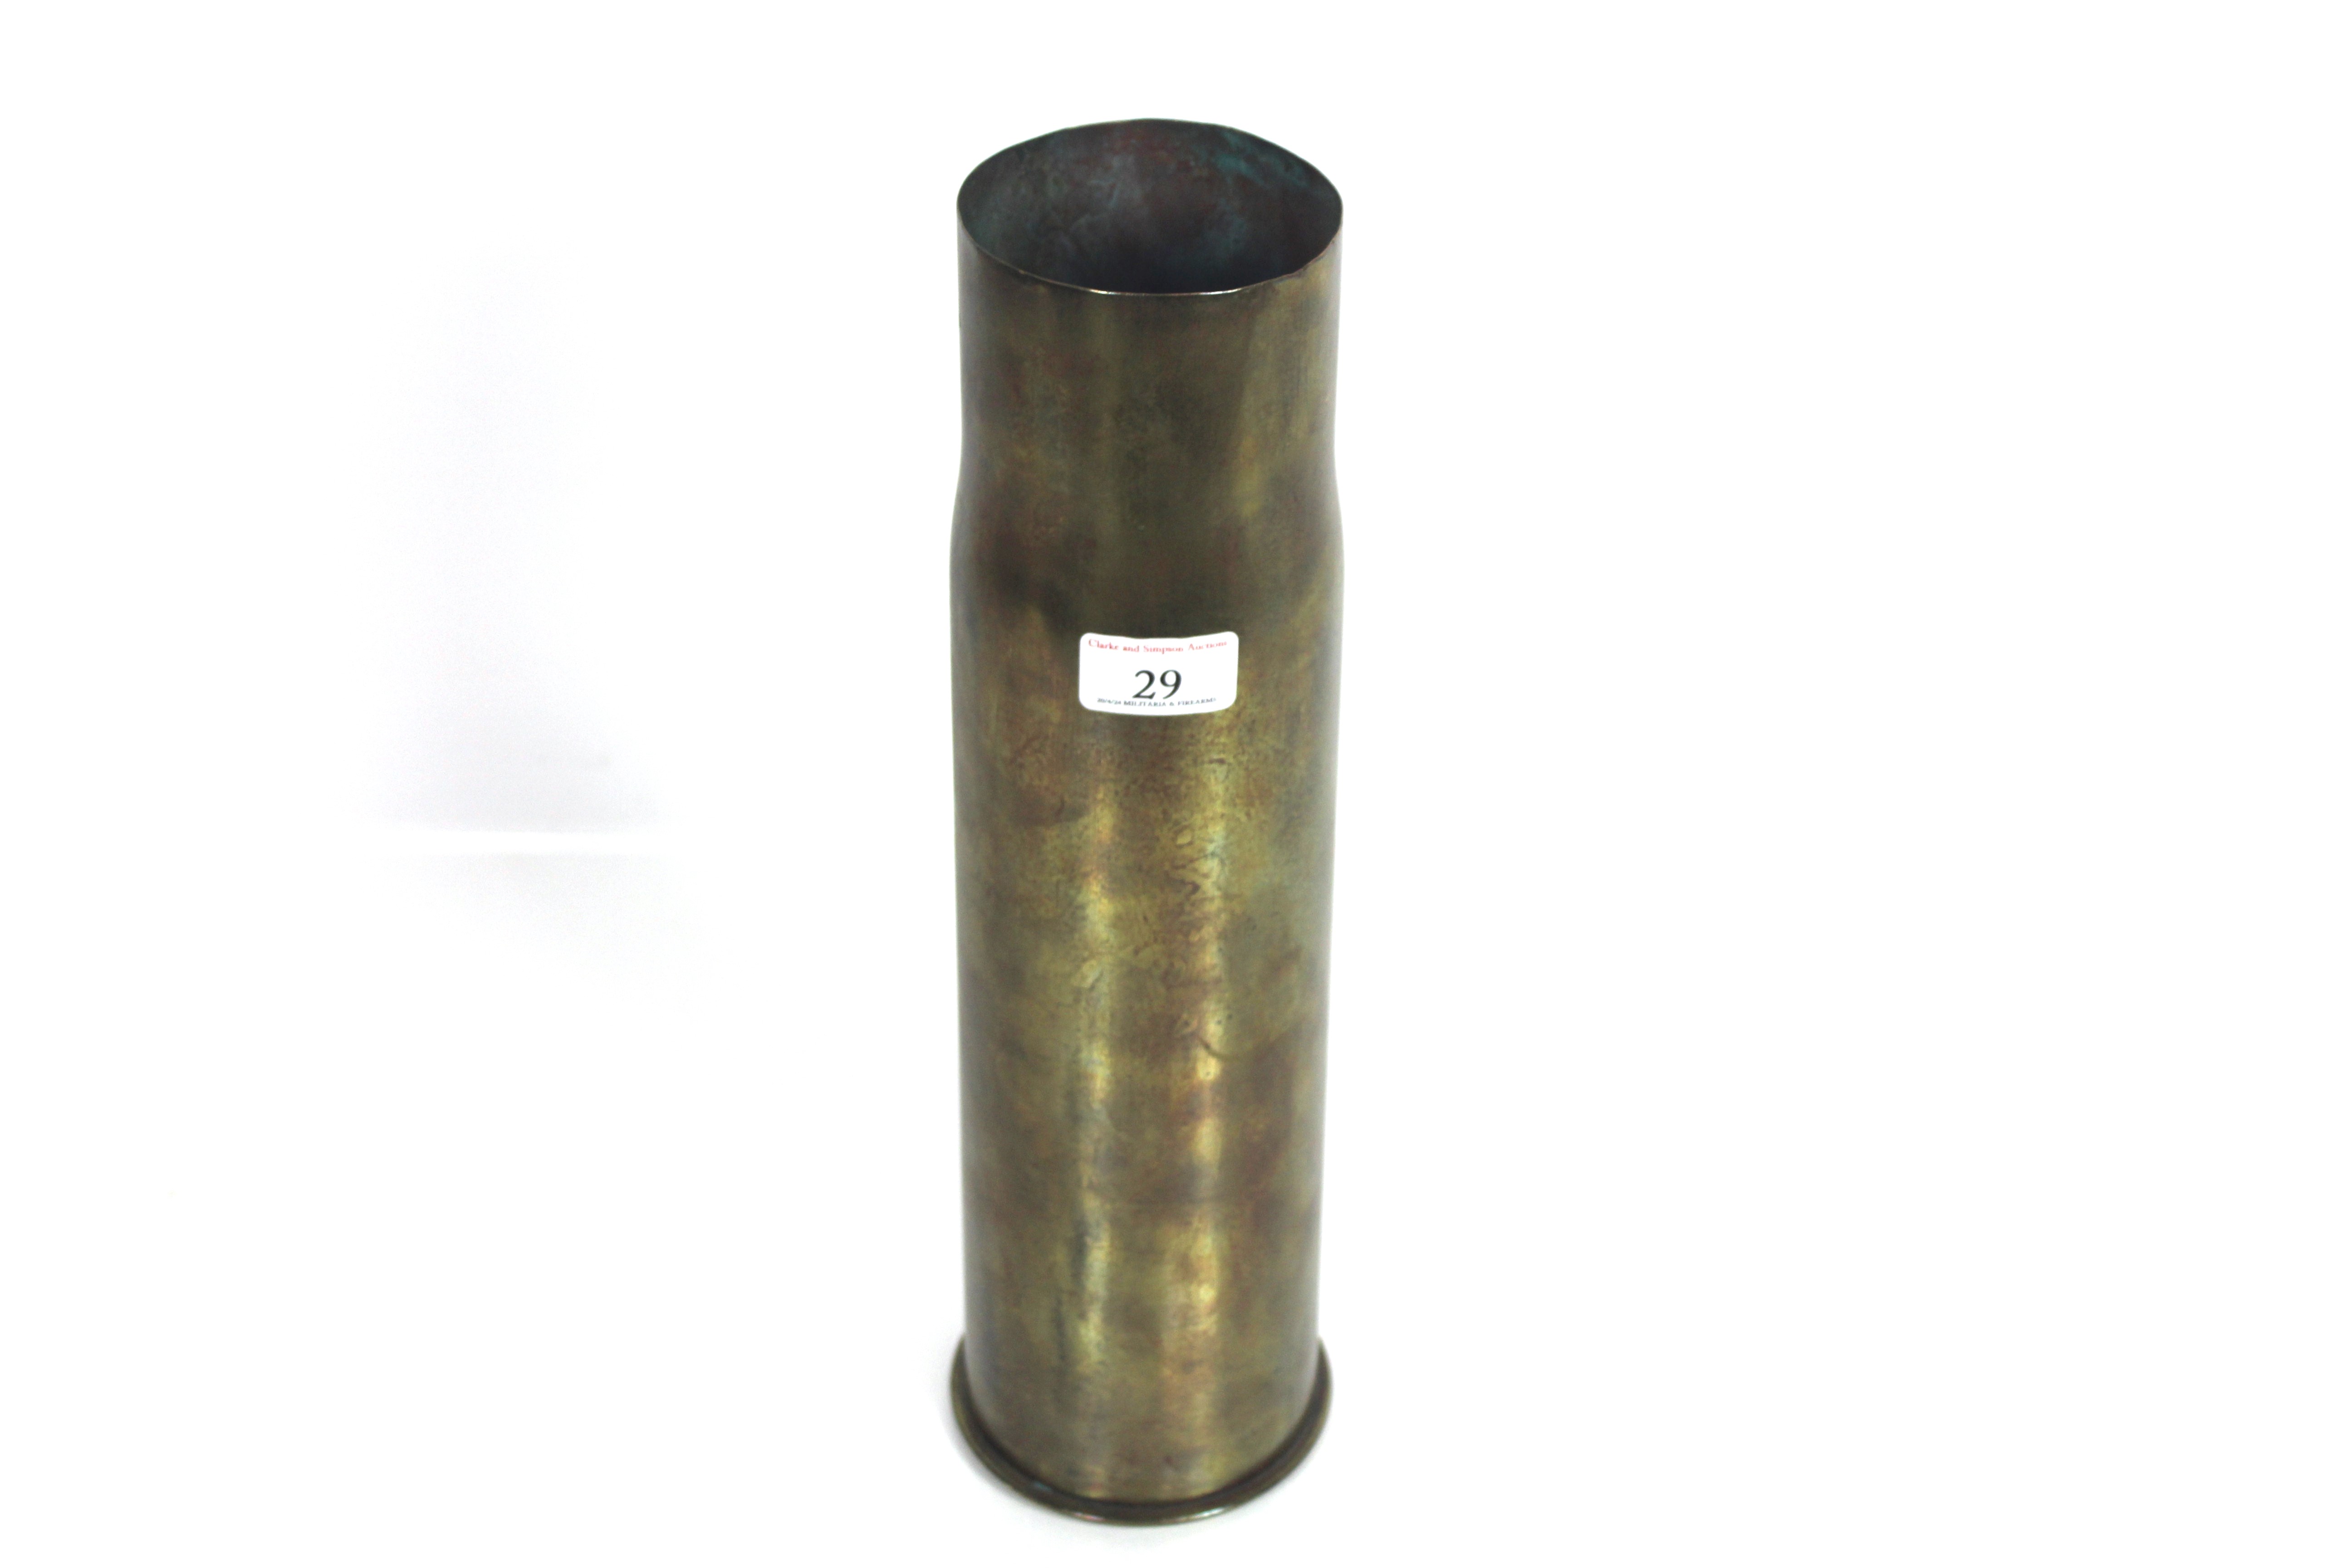 A 1906 dated German brass shell case approx. 15" i